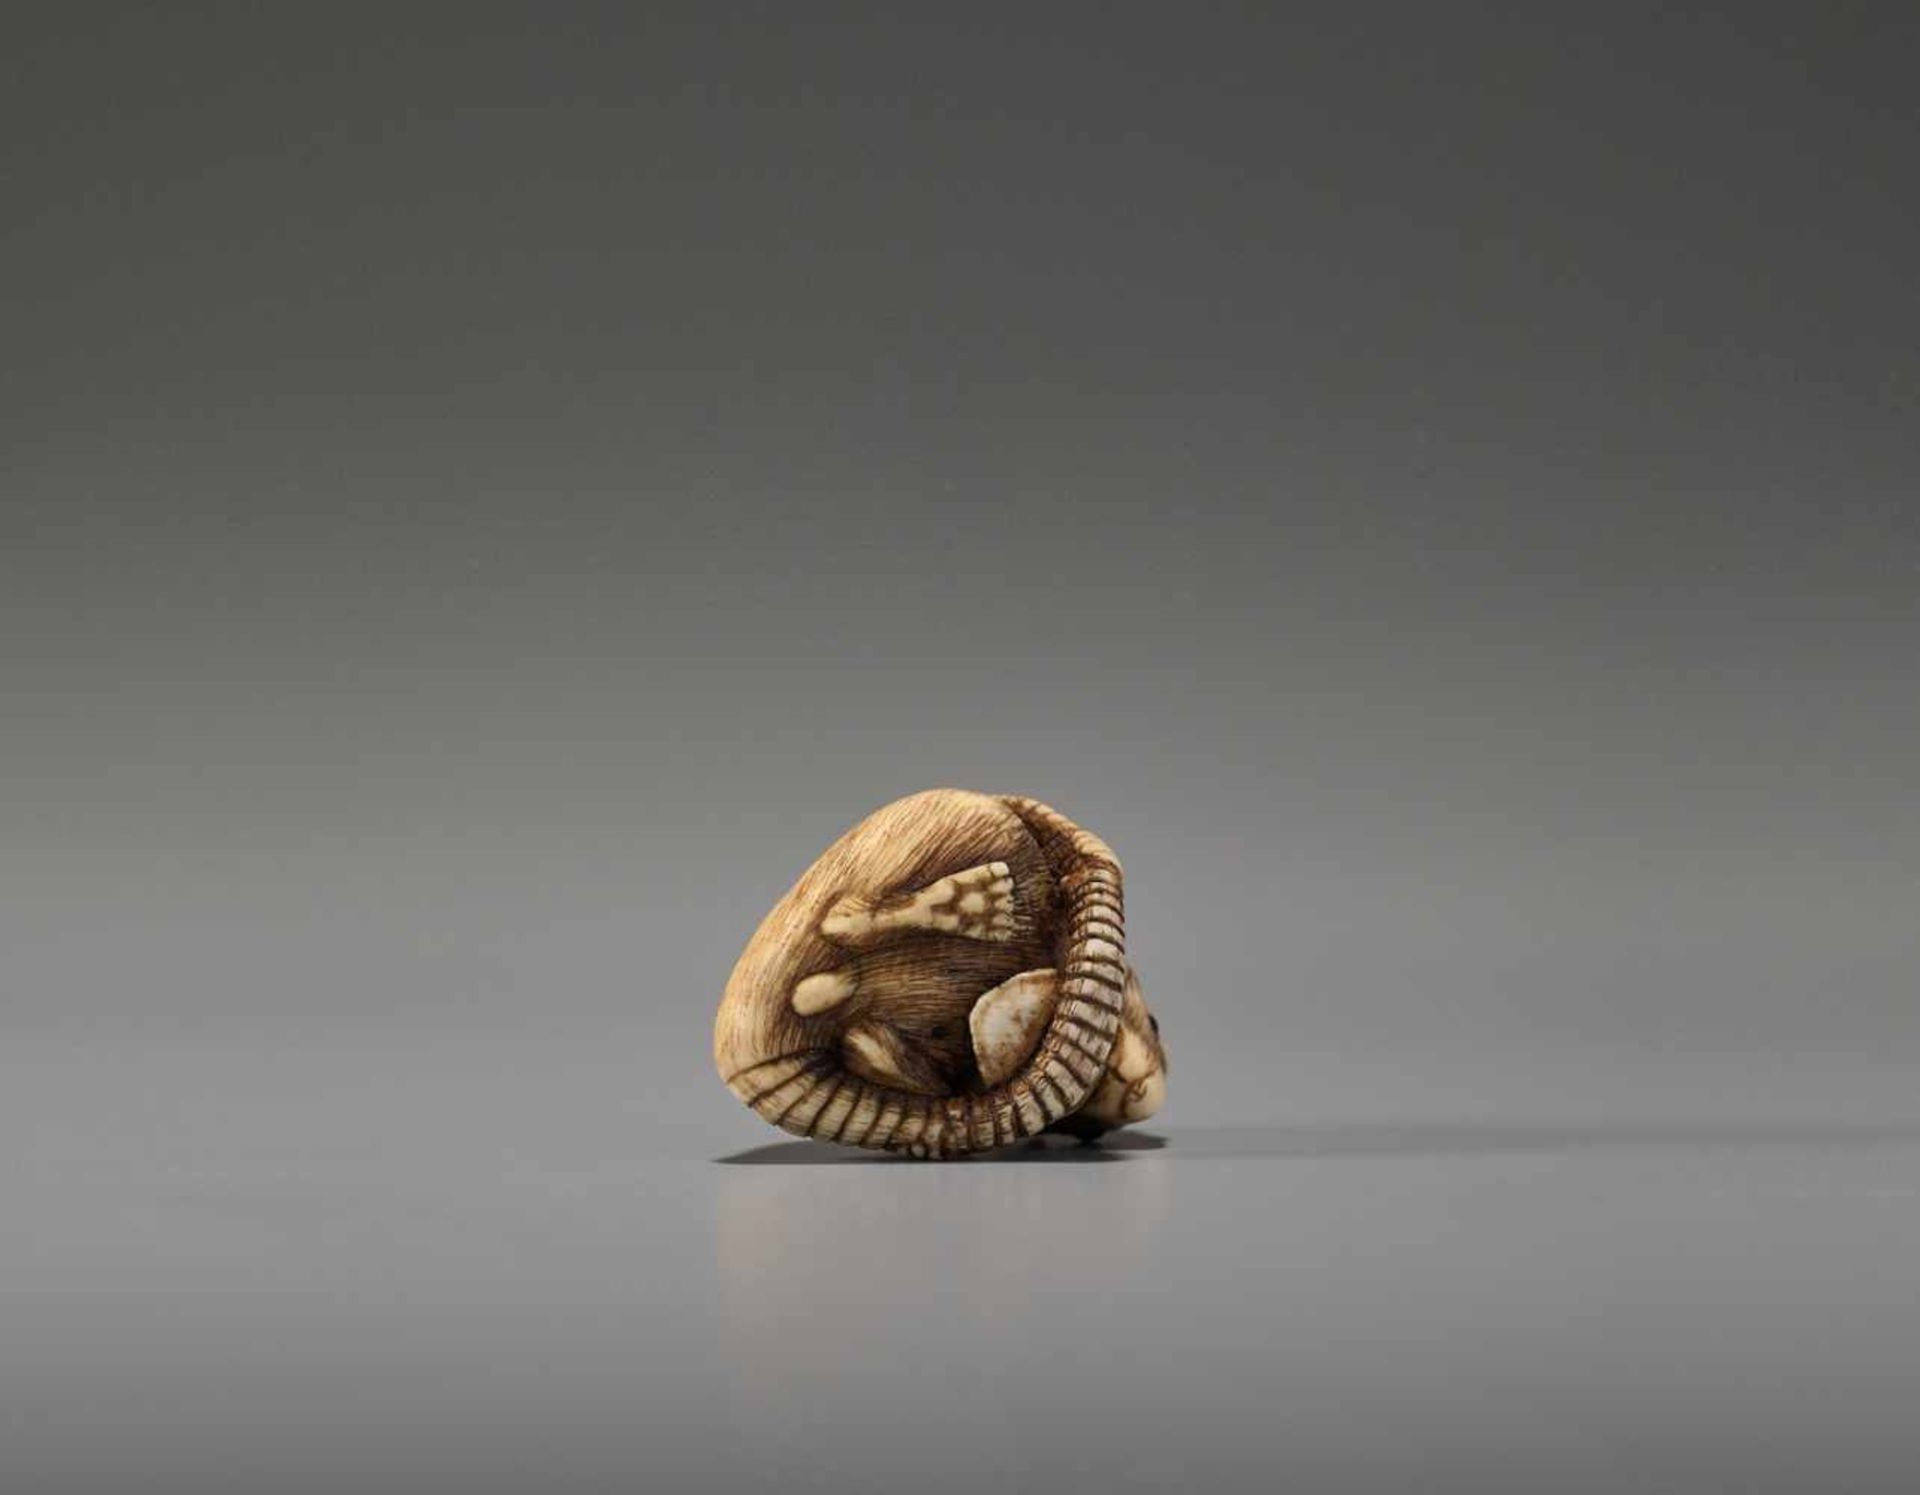 A POWERFUL KYOTO SCHOOL IVORY NETSUKE OF A RAT WITH A BEAN POD - Image 10 of 11